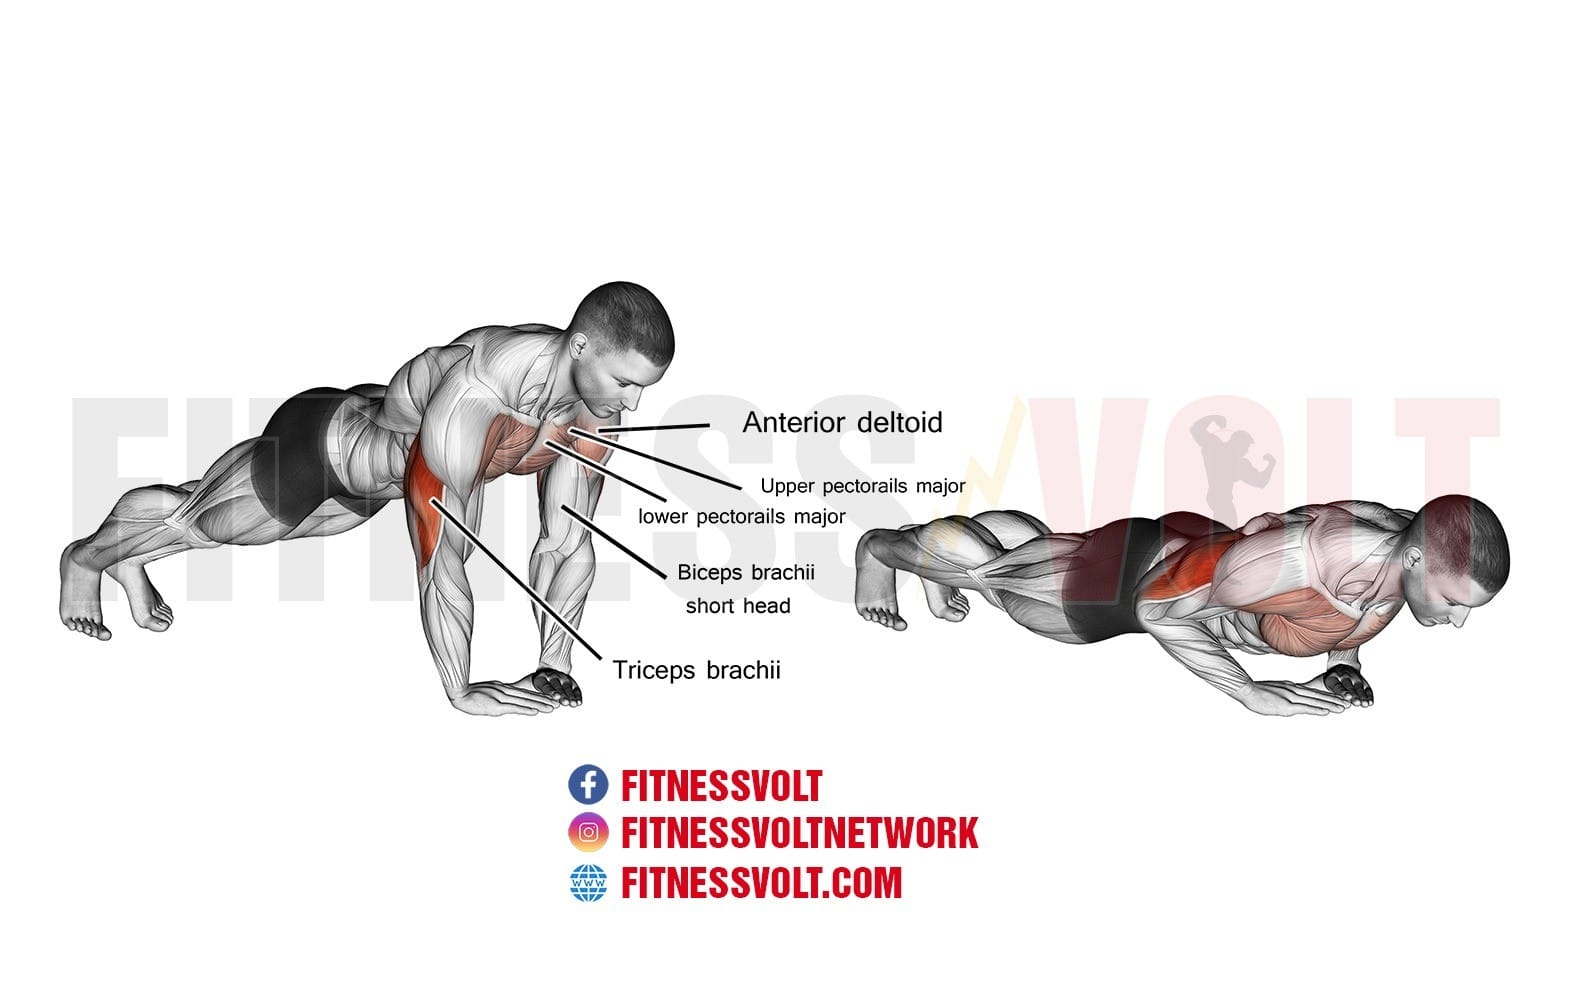 Diamond Push Up Triceps Chest Exercise Guides And Videos Fitness 7443